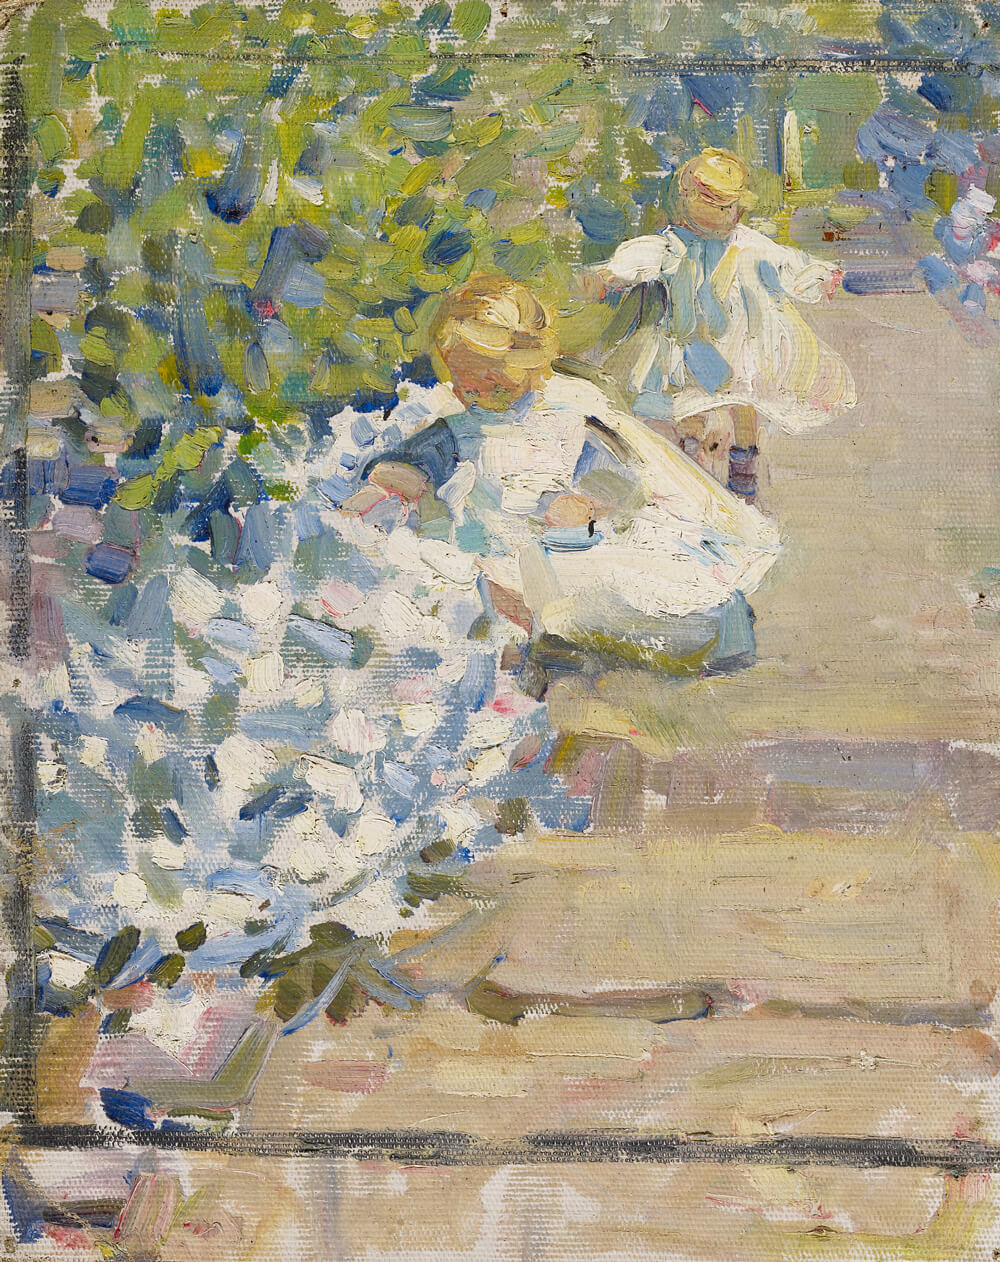 Sketch for ”Picking Flowers”, c. 1912, Helen McNicoll